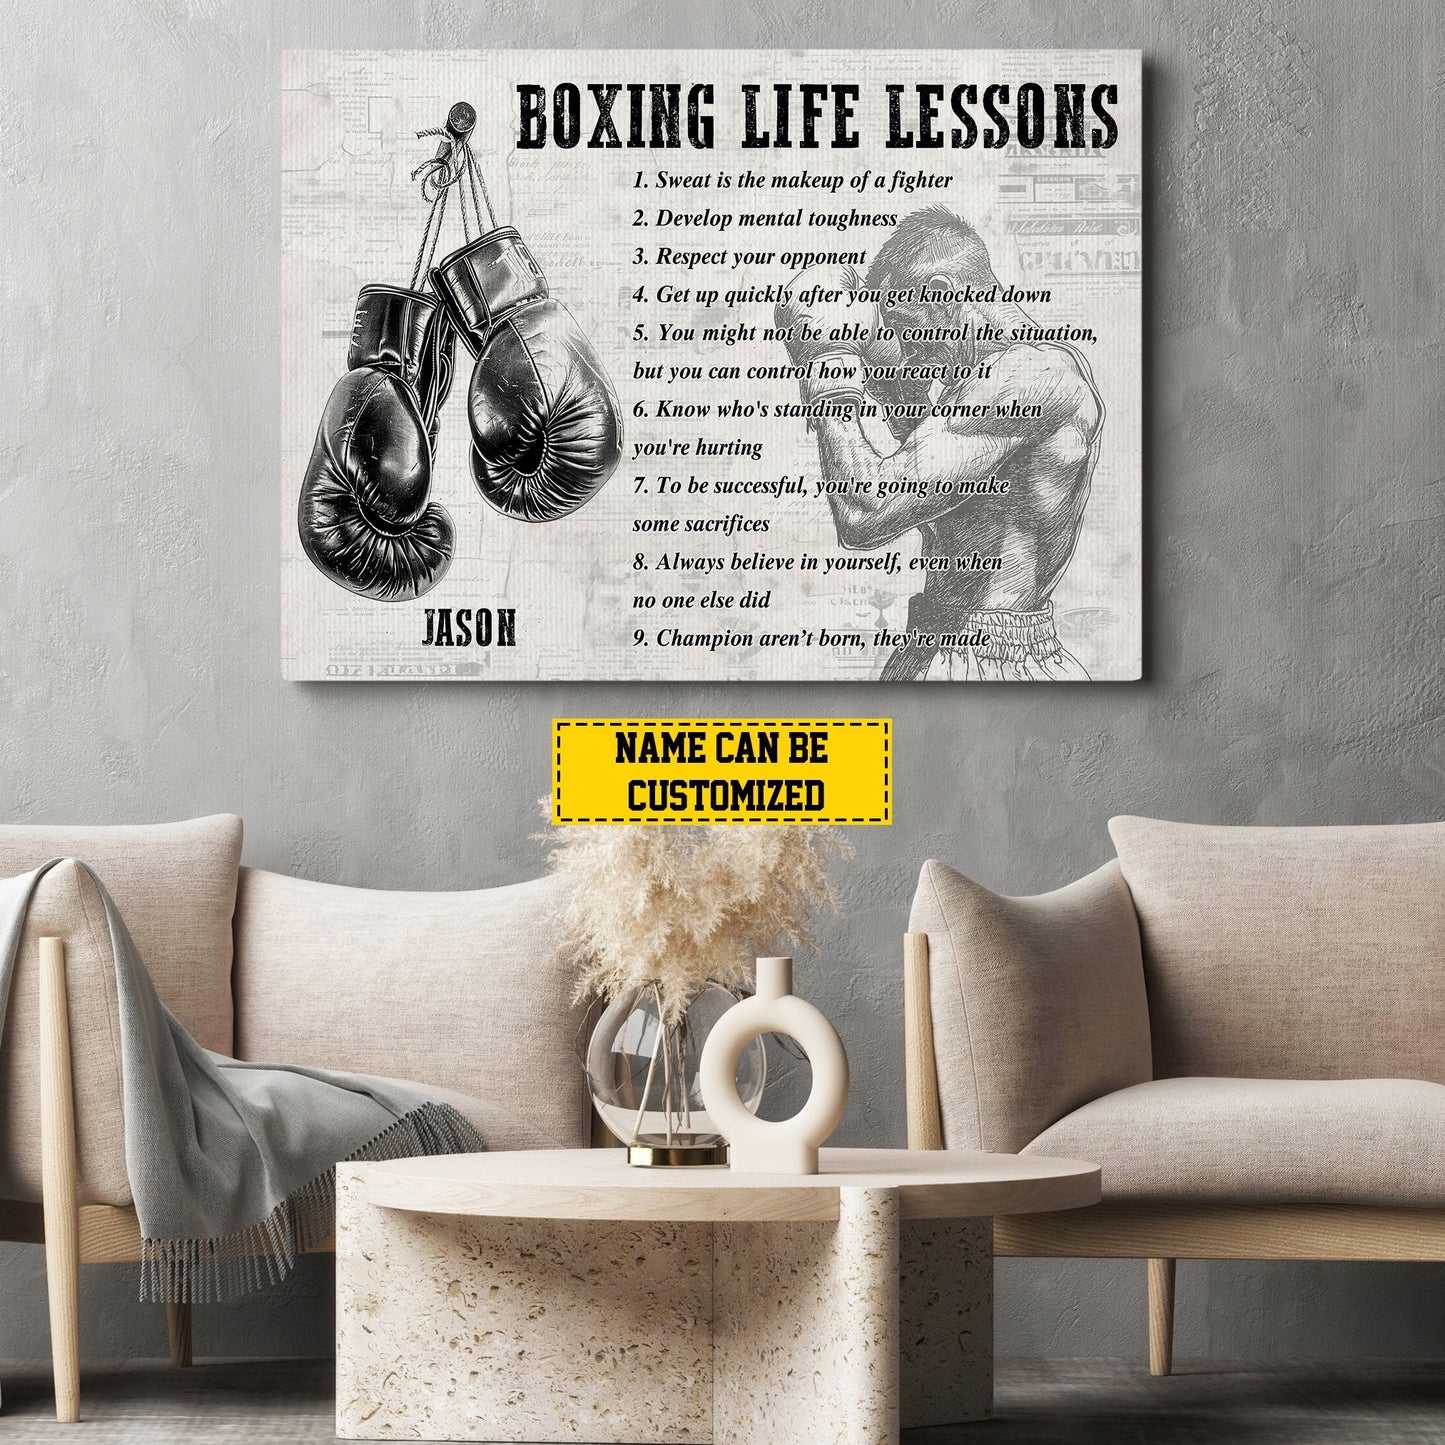 Boxing Life Lessons, Personalized Motivational Boxing Canvas Painting, Inspirational Quotes Wall Art Decor, Poster Gift For Boxing Lovers